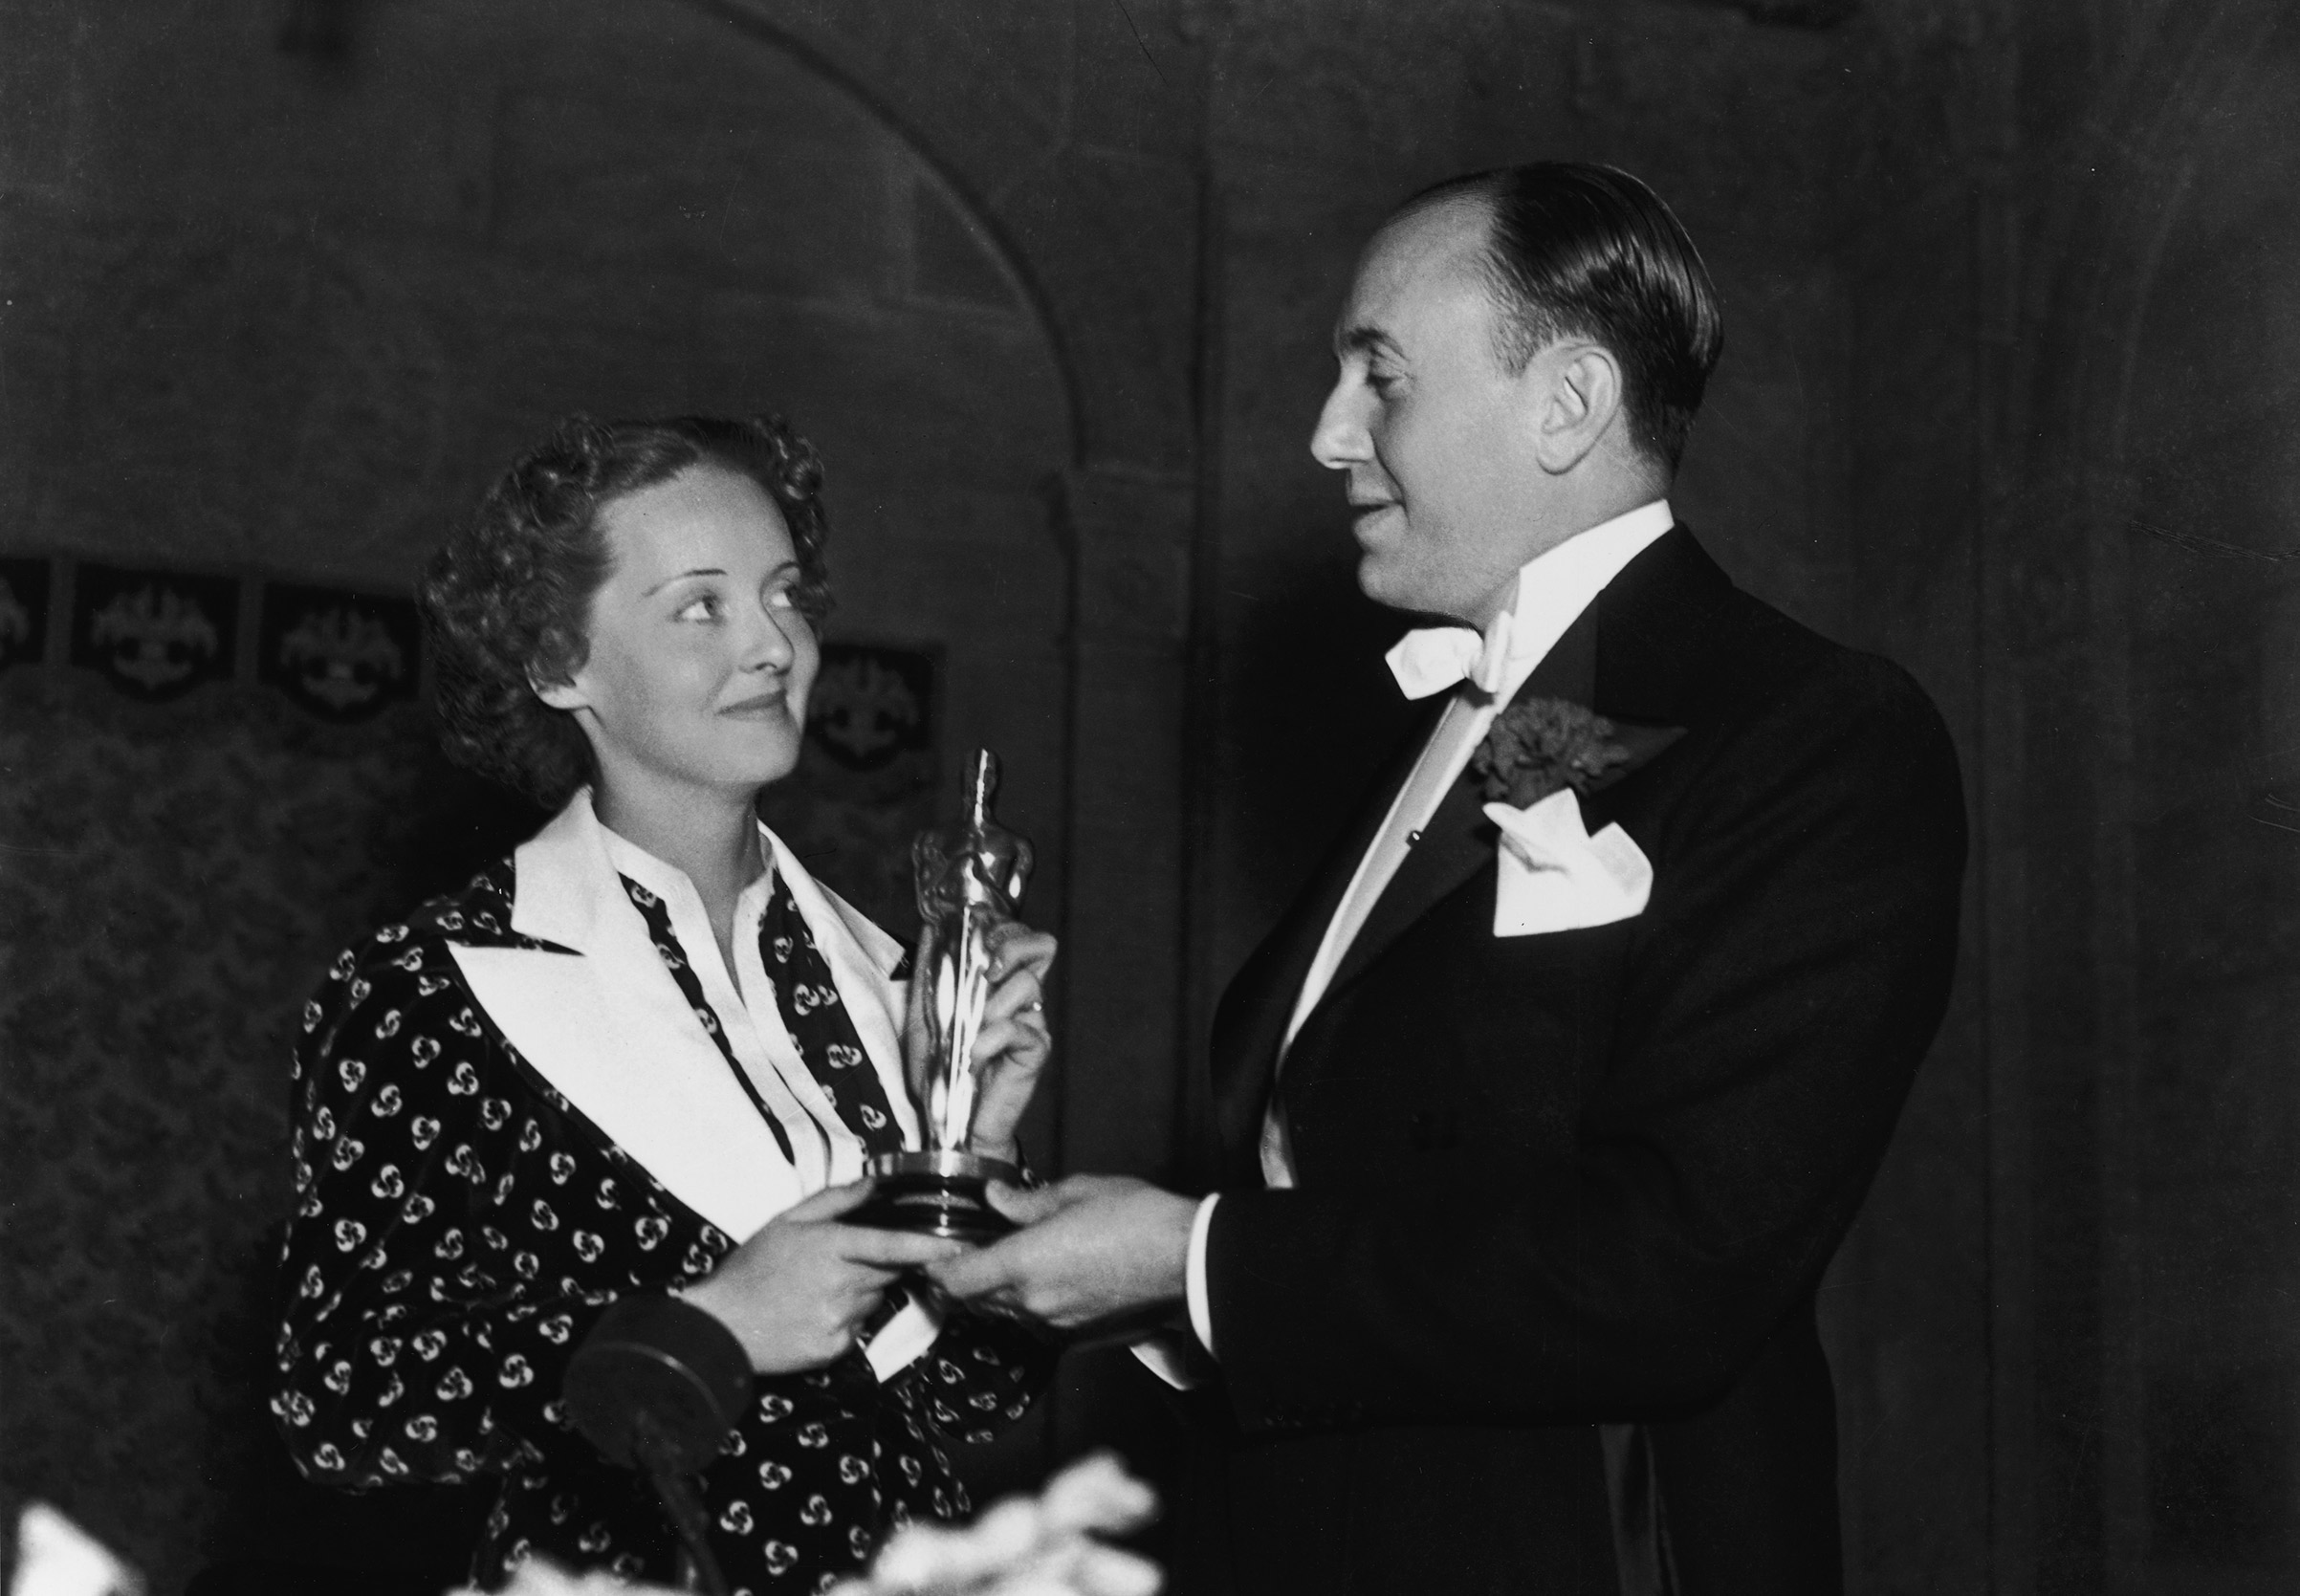 Actor Bette Davis and producer Jack Warner, one of the founders of Warner Bros. Pictures, hold Davis's Oscar for Best Actress for &lt;i&gt;Dangerous&lt;/i&gt; at the Biltmore Hotel in Los Angeles, California, on March 5, 1936. (Hulton Archive—Getty Images)